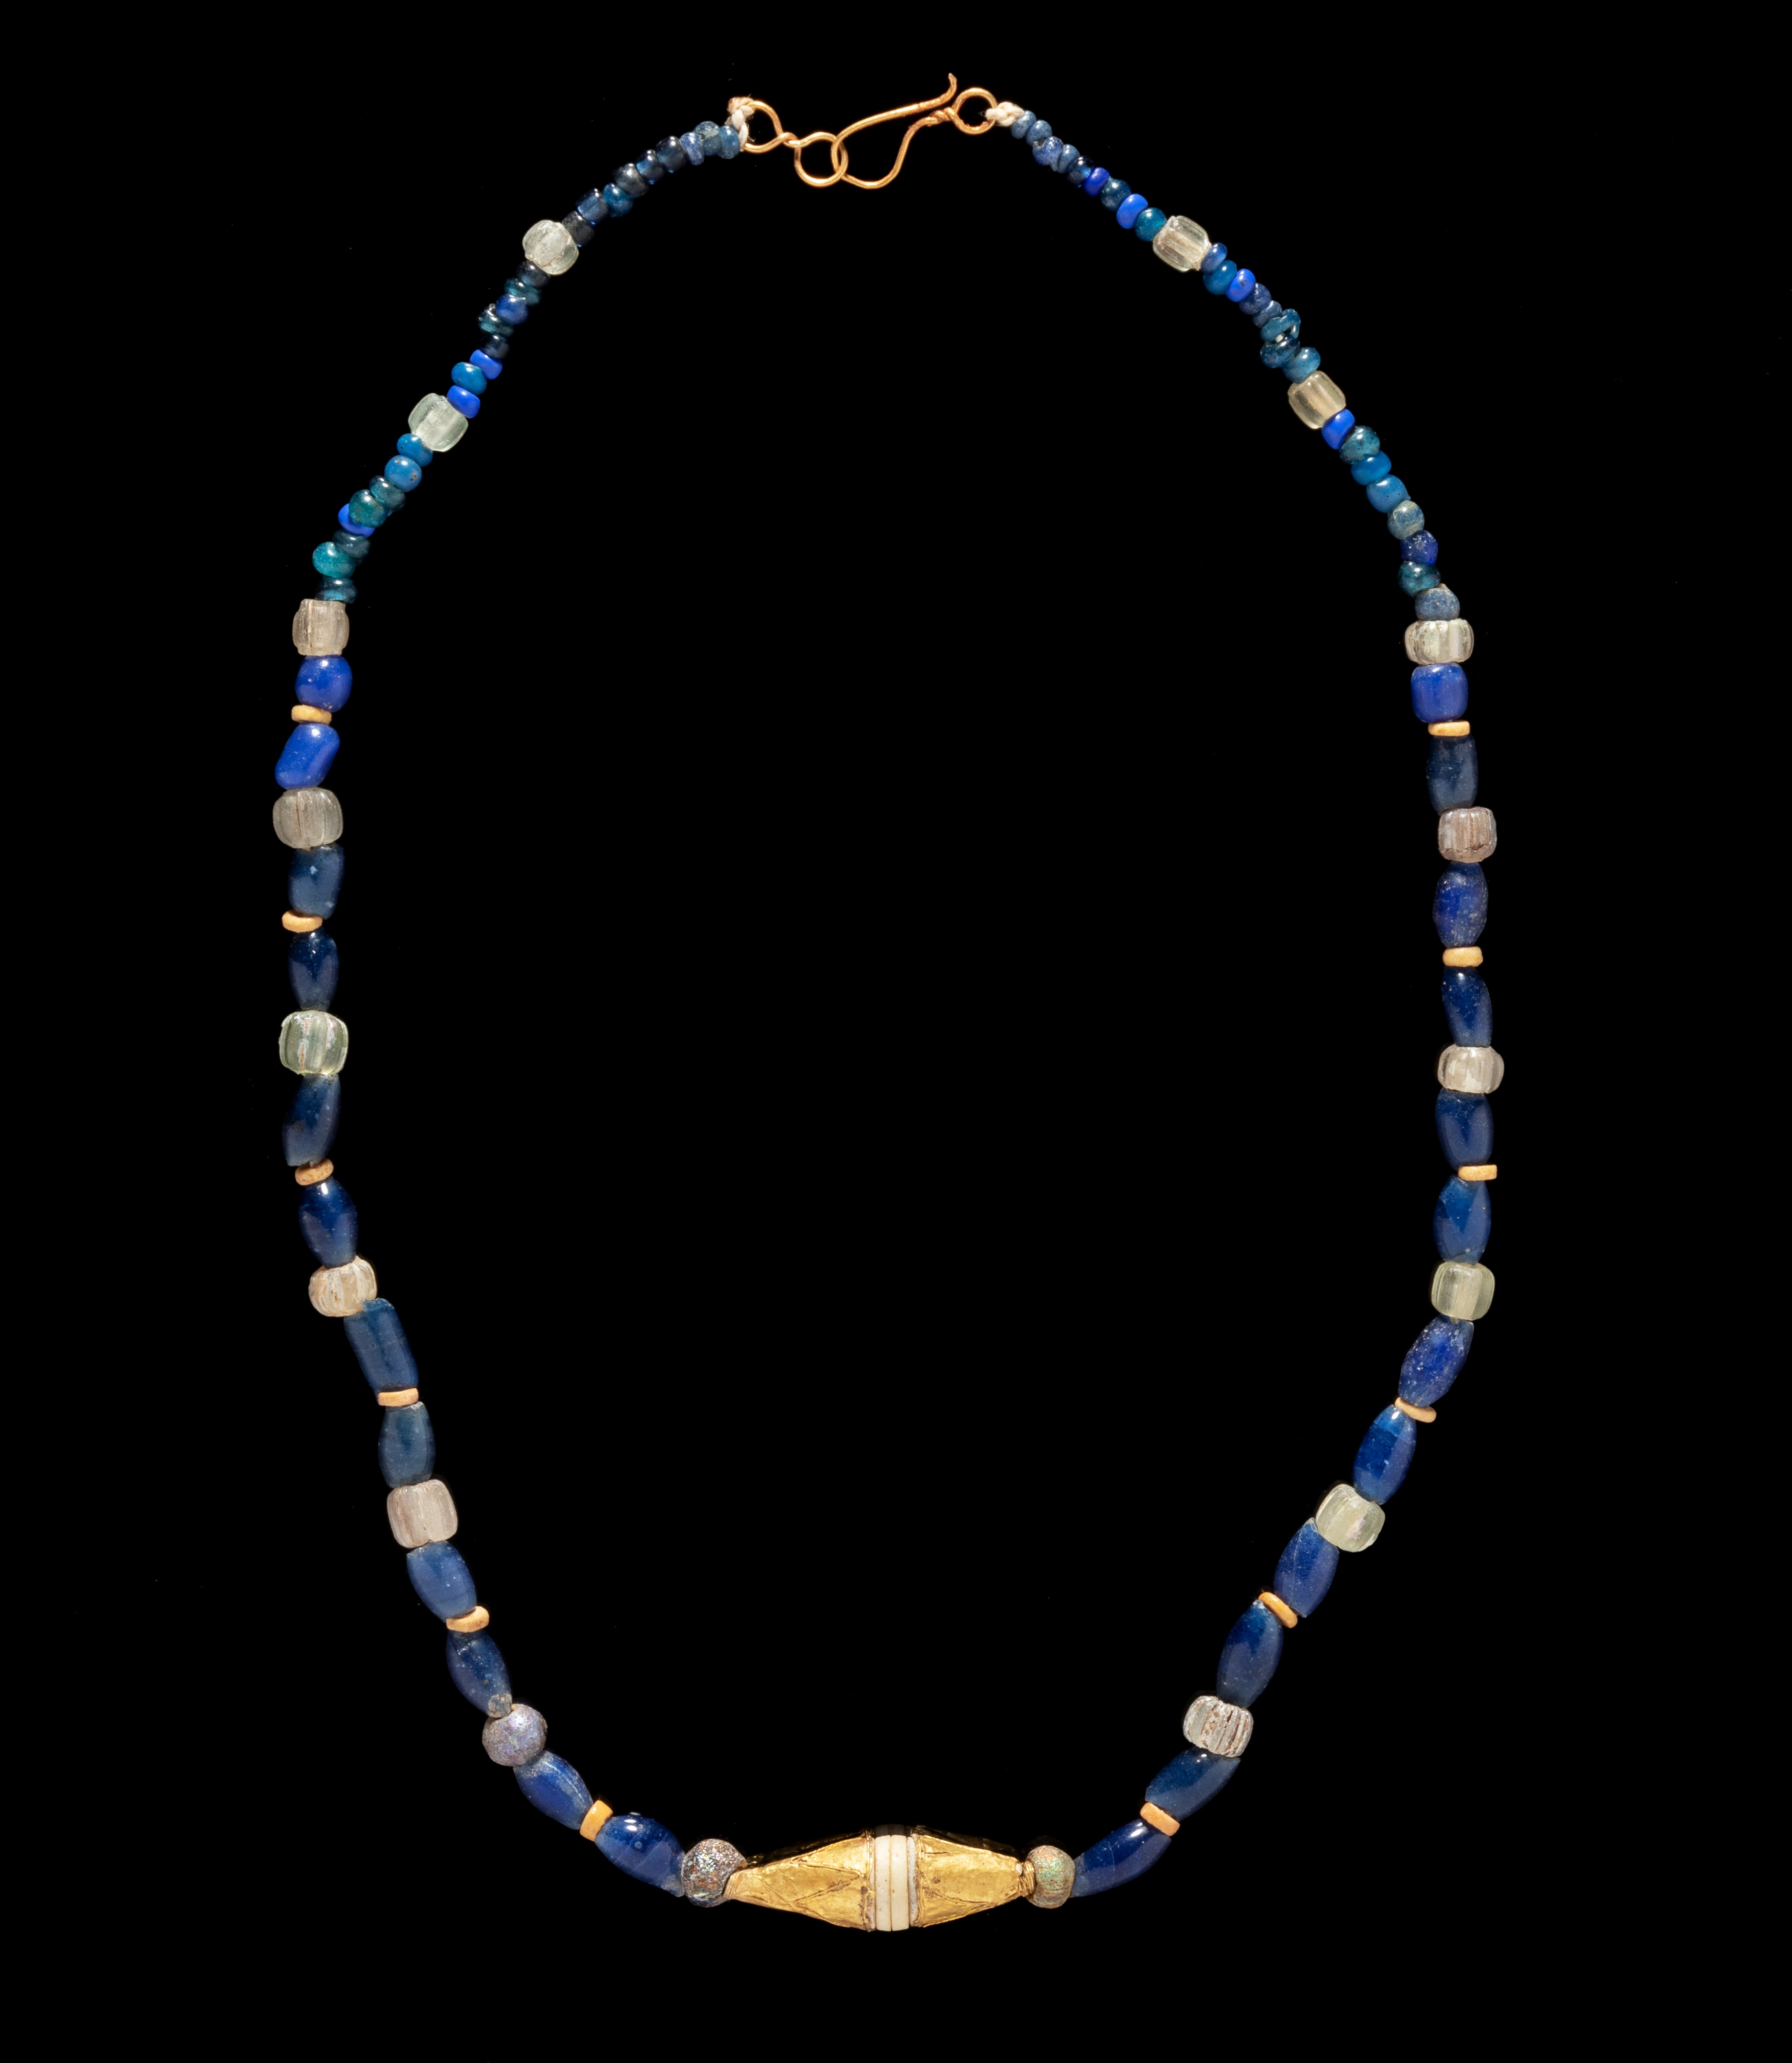 A Roman Gold and Glass Bead Necklace  Length 19 13/16 inches (25 cm). - Image 3 of 6